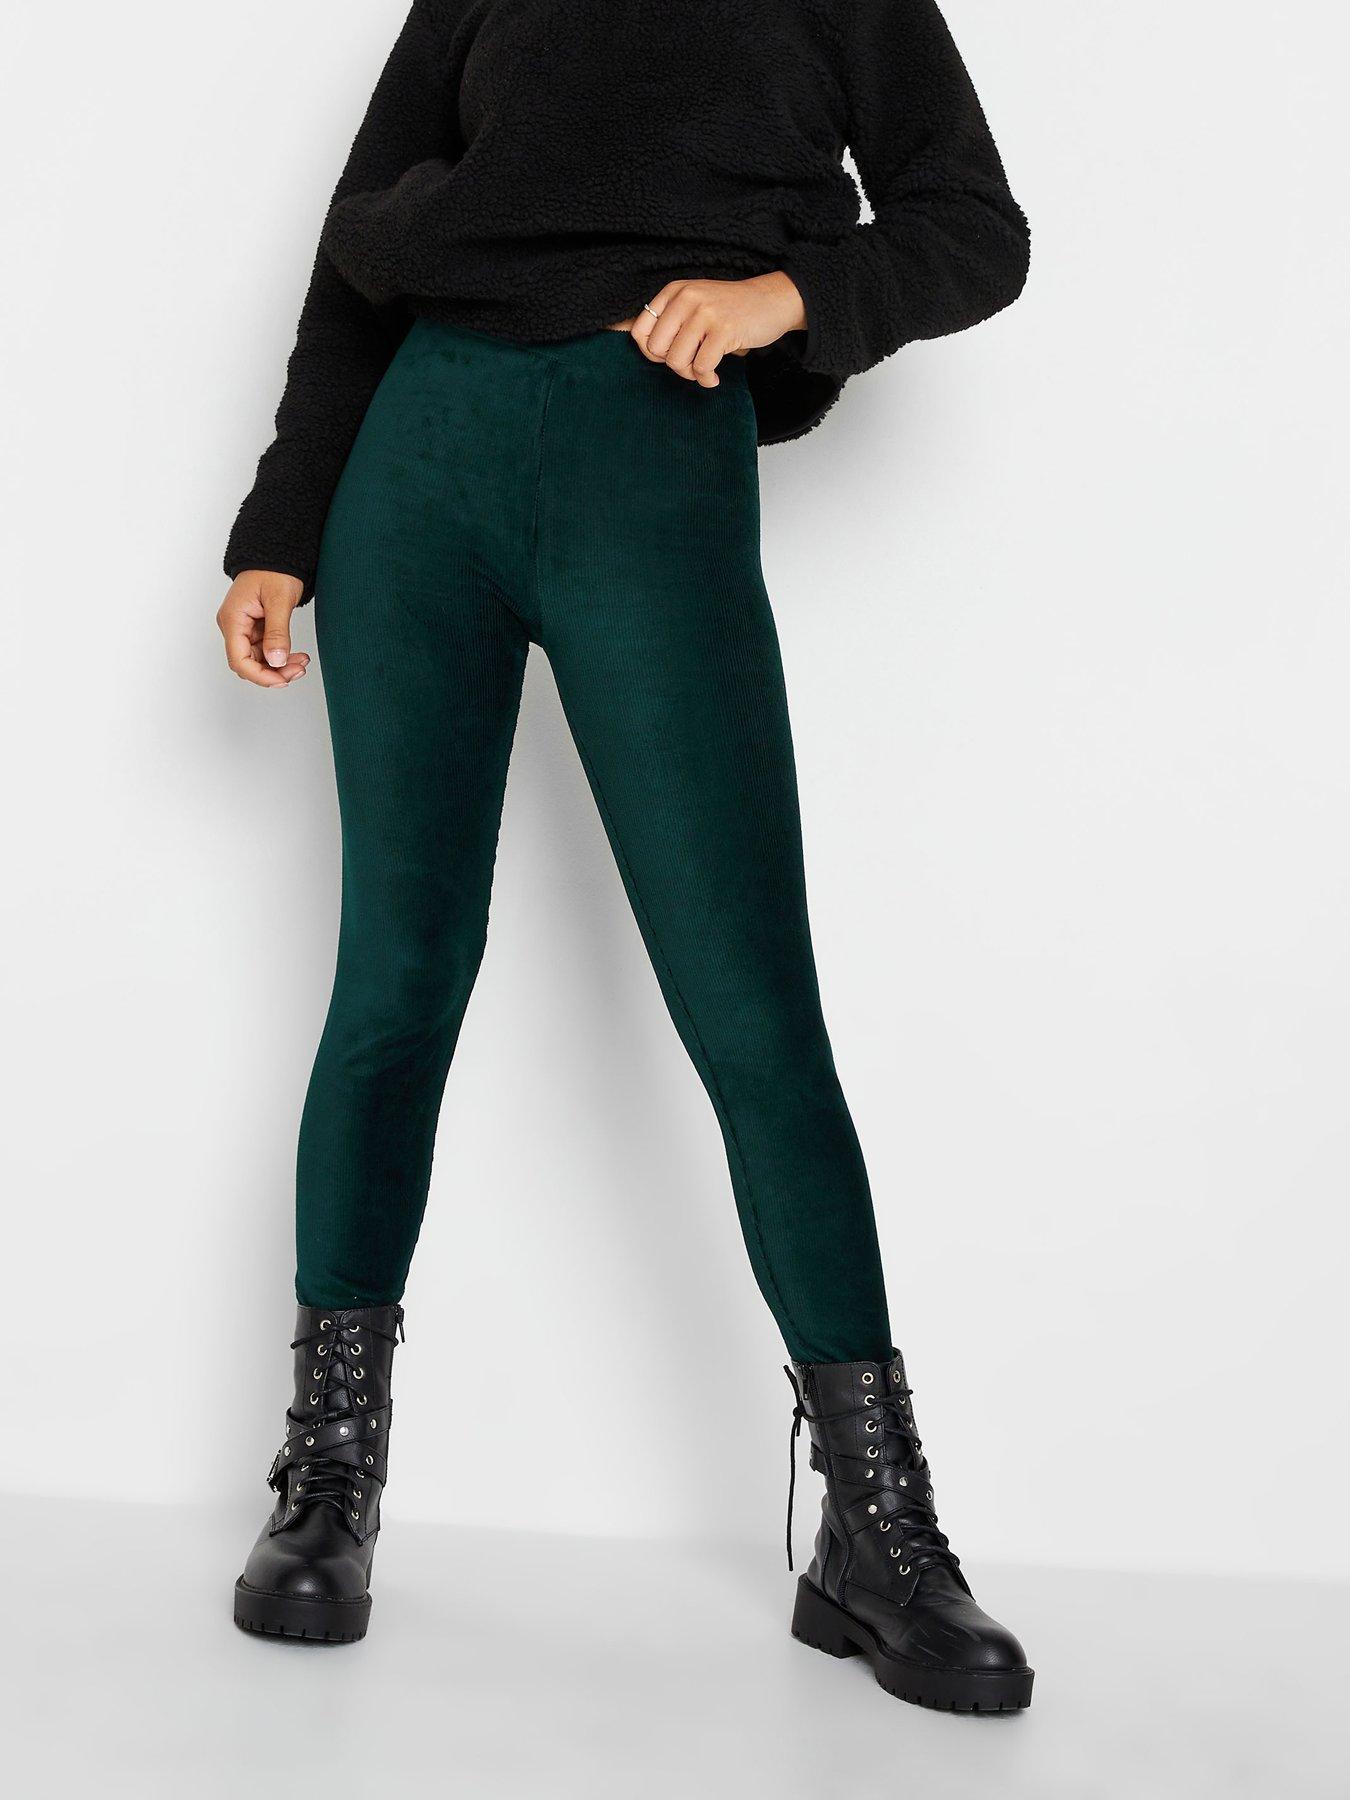 New Year Of Ours XS Green Thermal Ski Belted Leggings $124